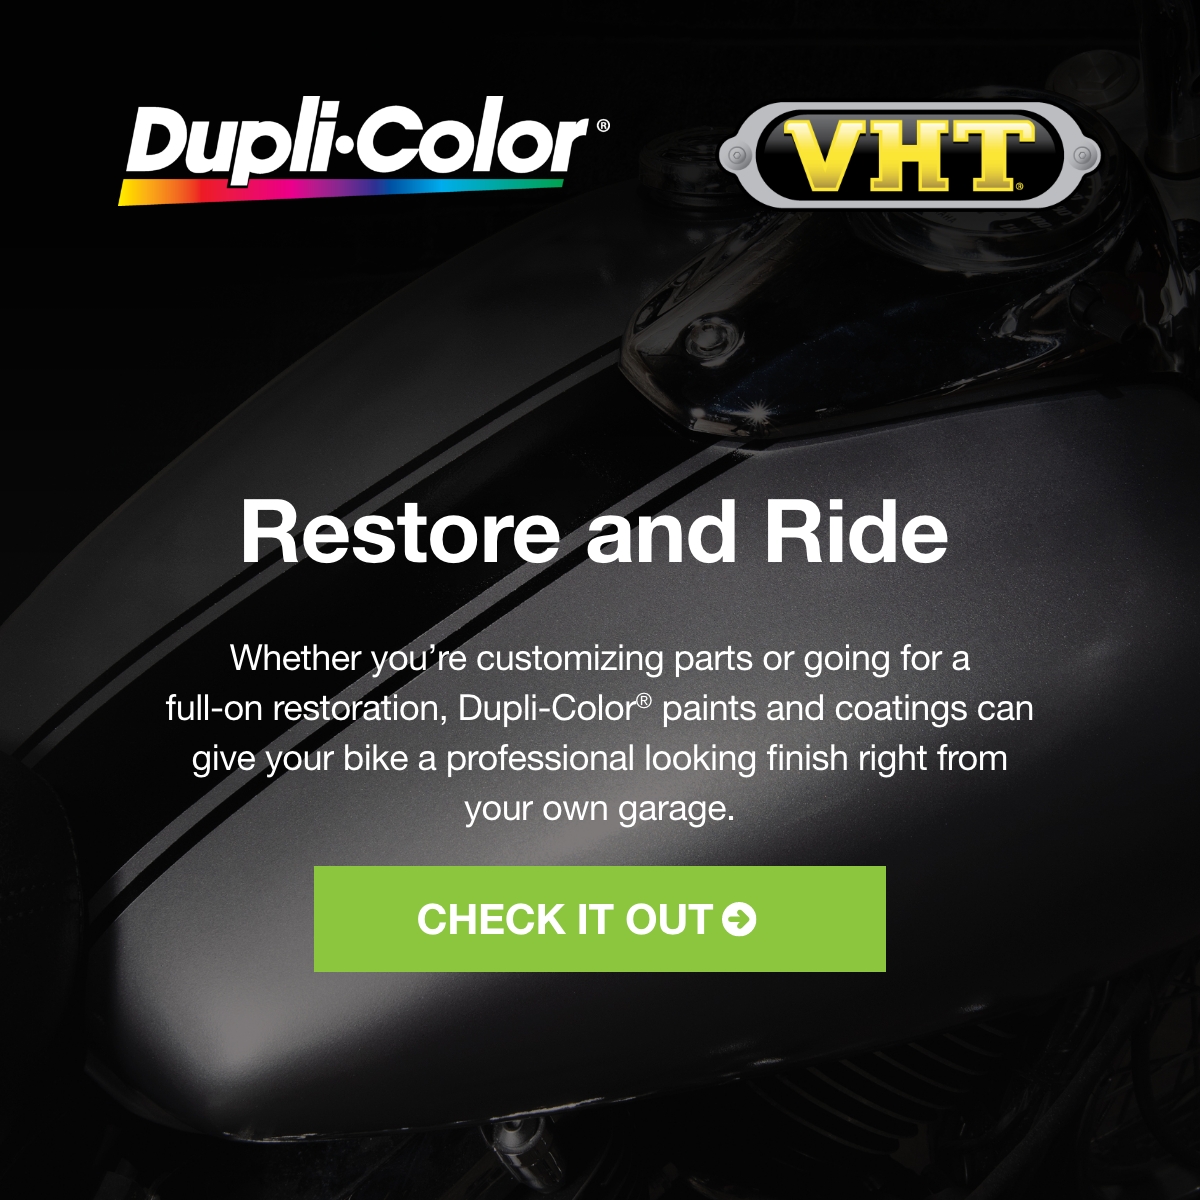 Duplicolor – The leading manufacturer of Do-It-Yourself Automotive